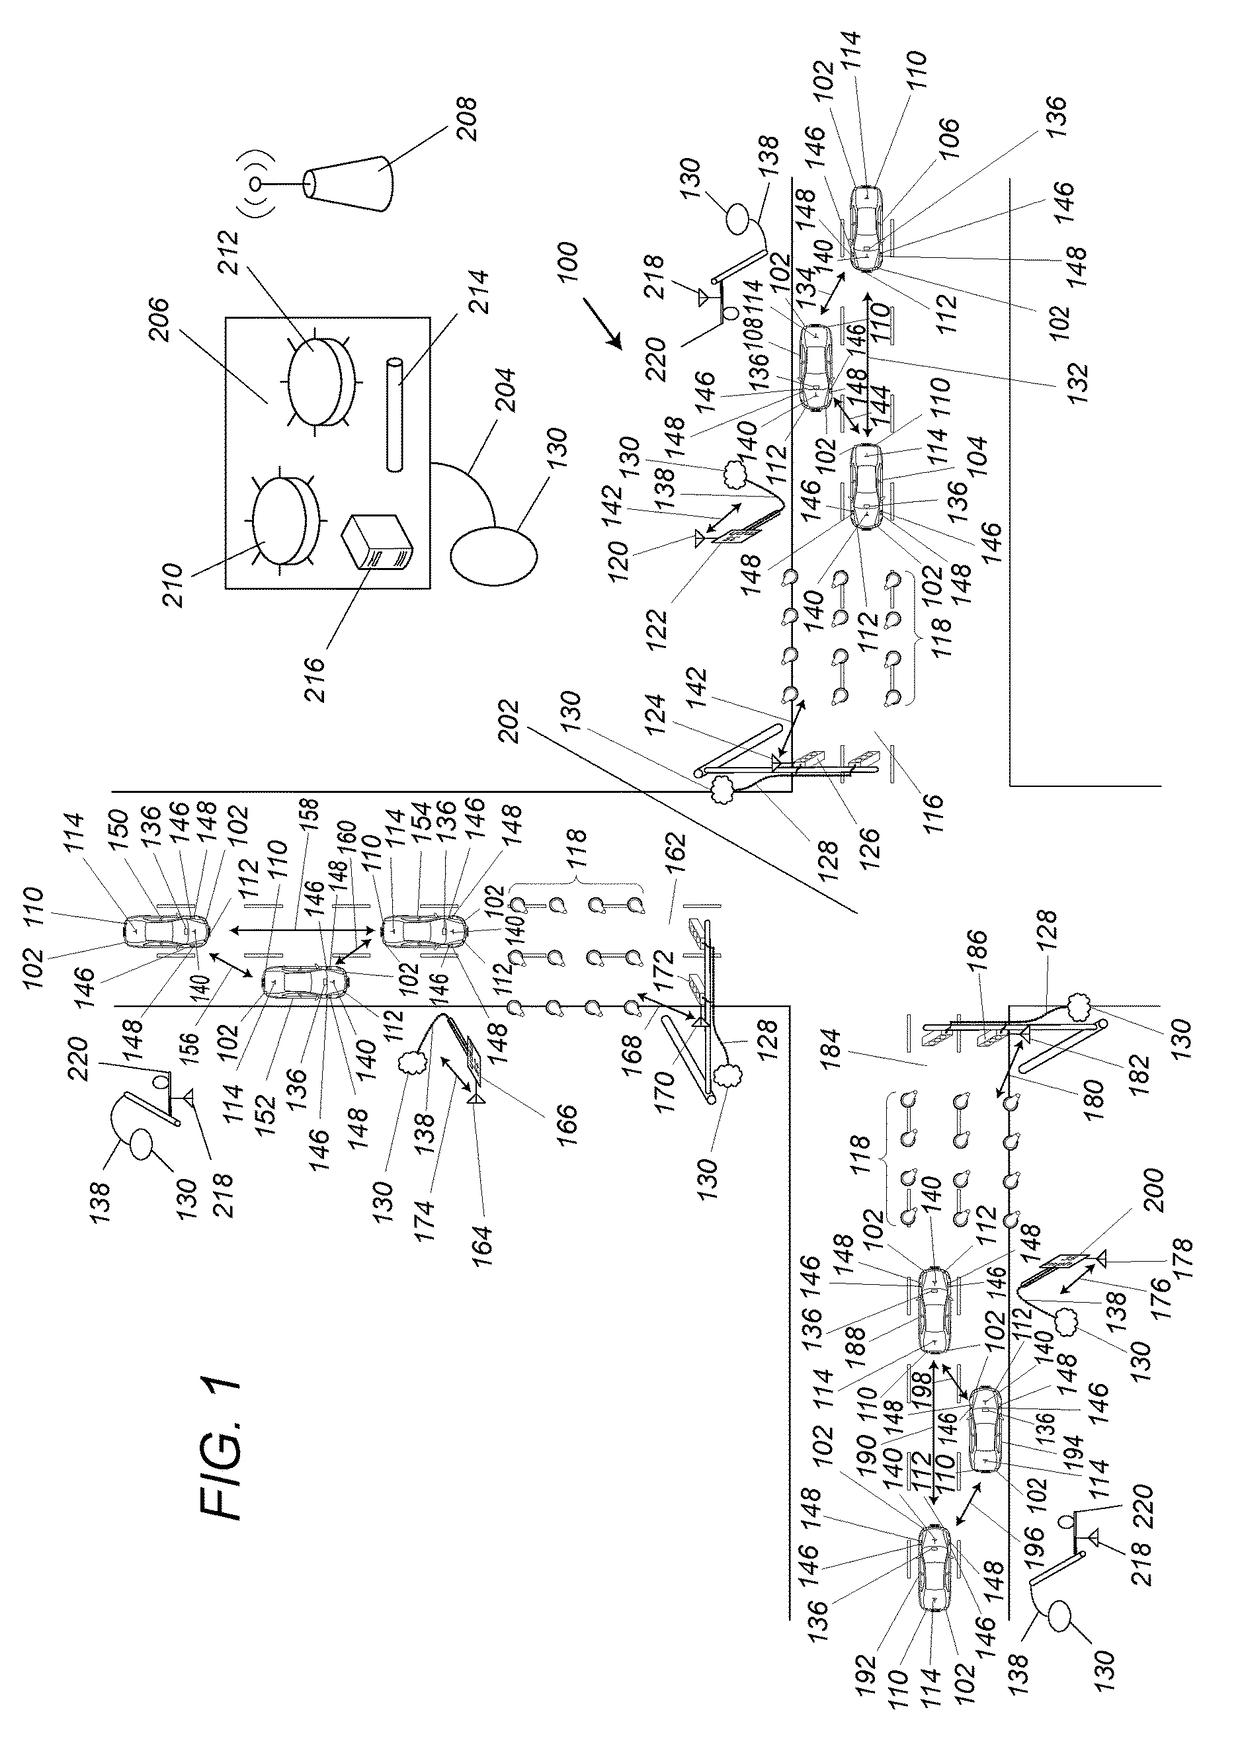 Vehicle-to-vehicle and traffic signal-to-vehicle traffic control system